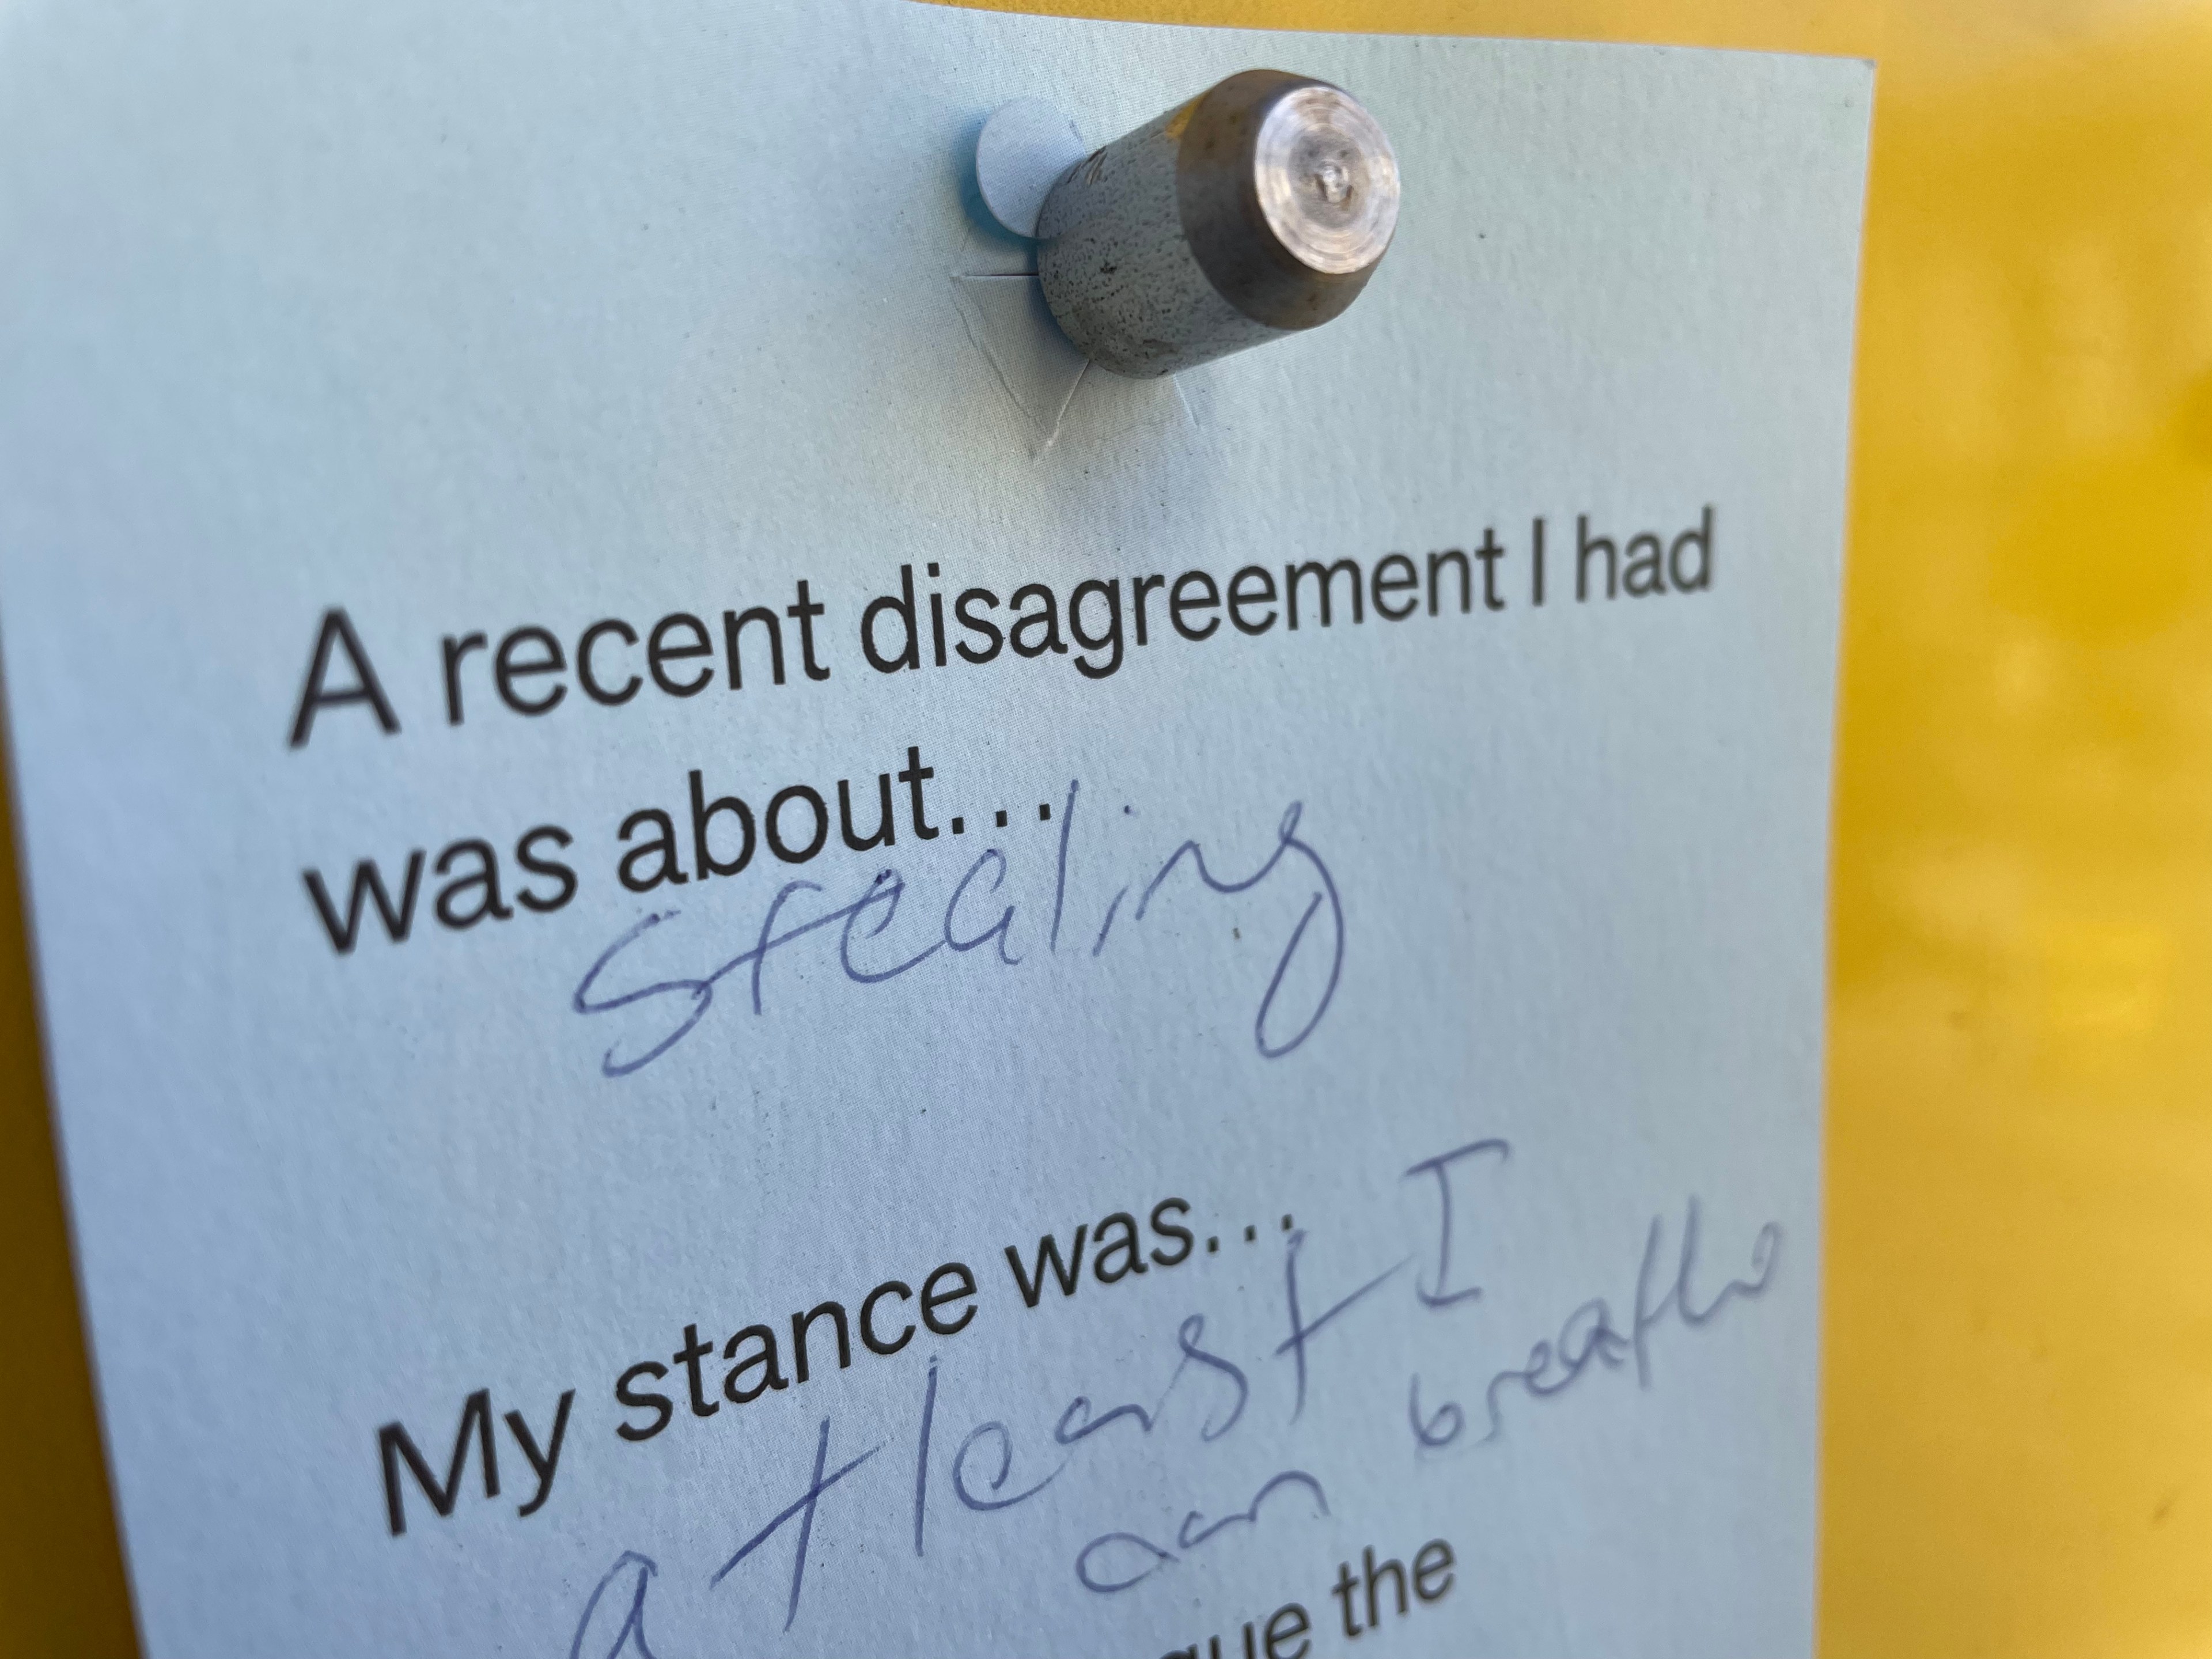 A note pinned to a yellow background reads, "A recent disagreement I had was about stealing. My stance was... least I can breathe" with words blurred.